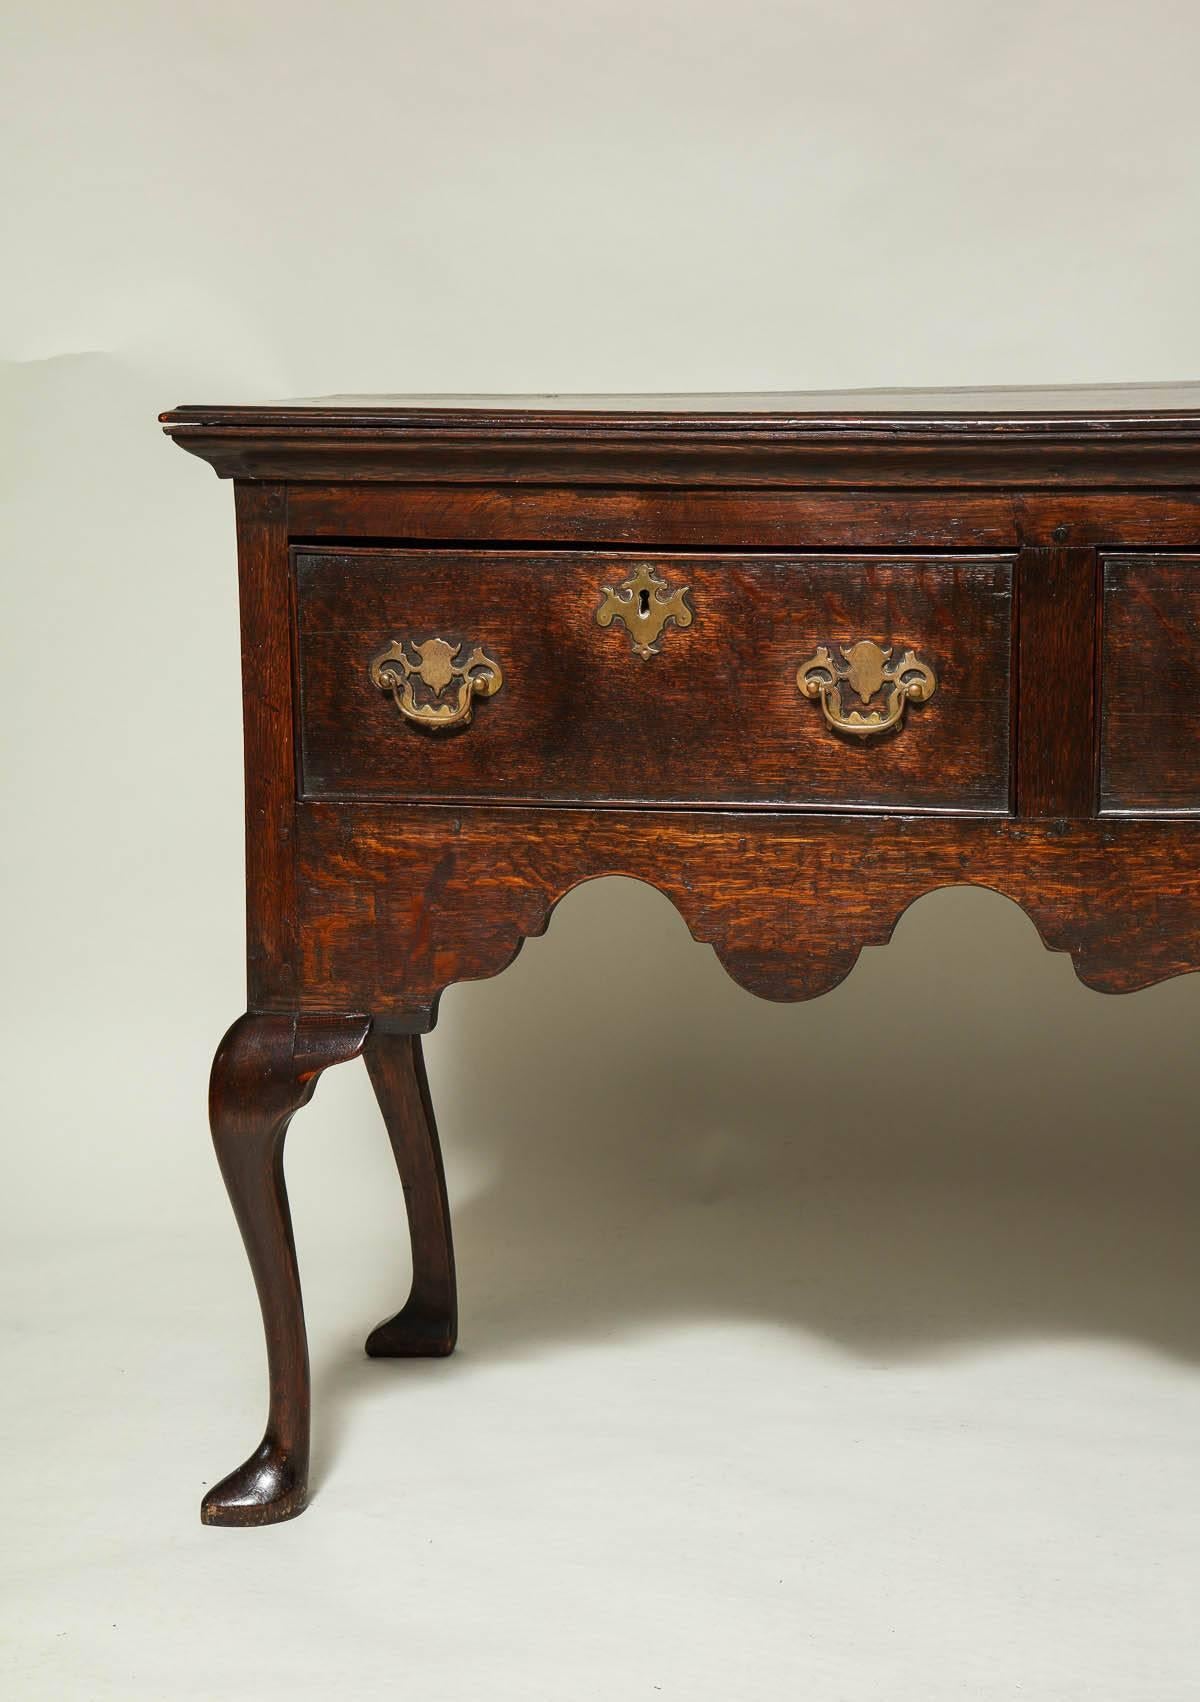 Good 19th century Welsh low dresser with rich molded detail under the top, over three drawers with original pierced brasses over richly scalloped apron and standing on cabriole legs ending in slipper feet.